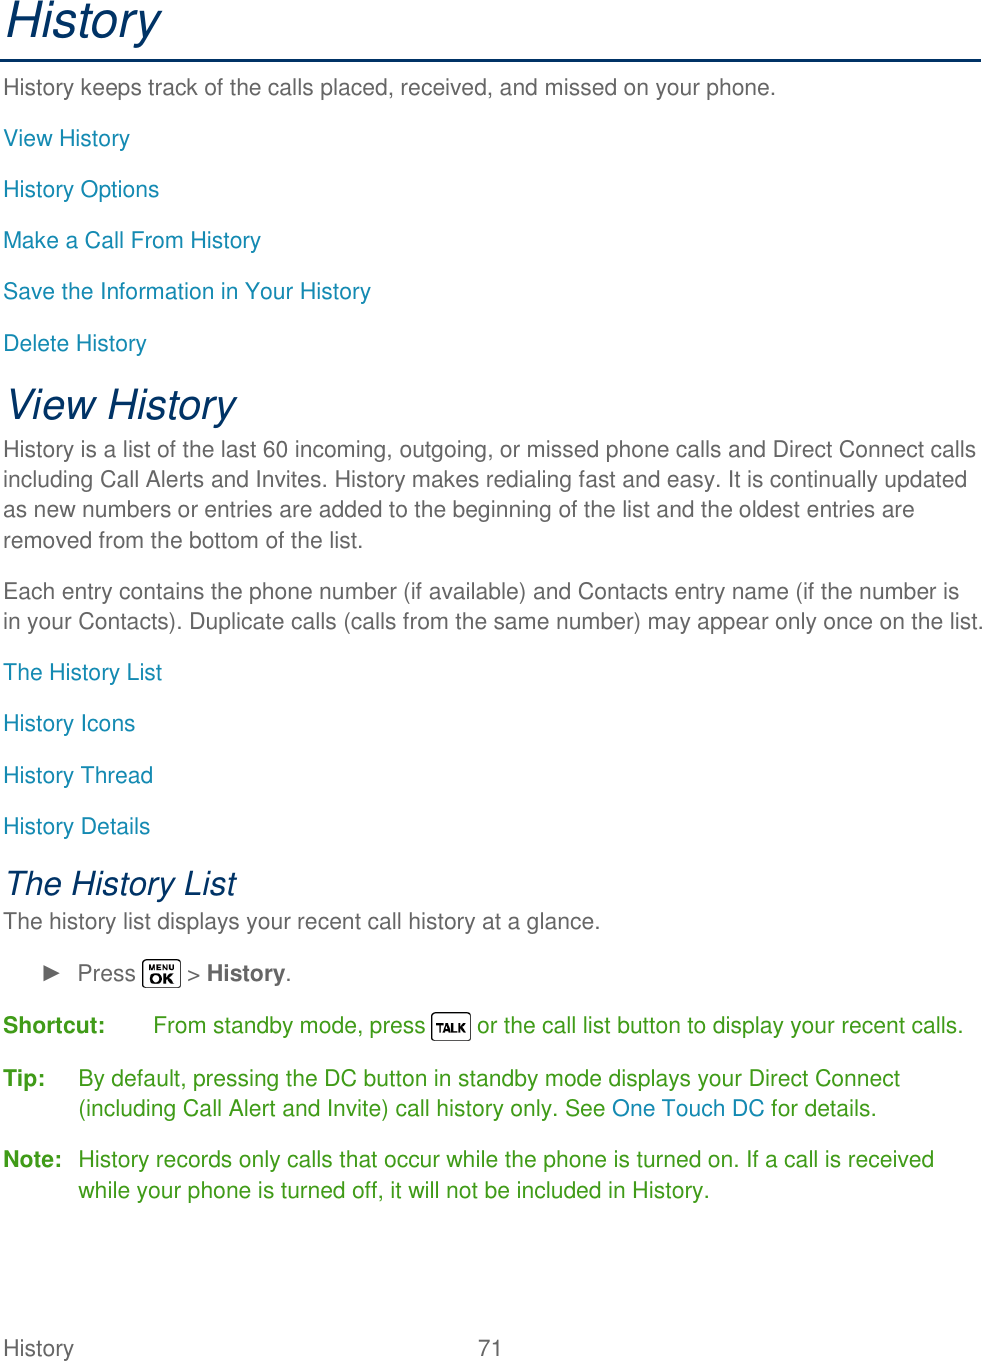  History   71   History History keeps track of the calls placed, received, and missed on your phone. View History History Options Make a Call From History Save the Information in Your History Delete History View History History is a list of the last 60 incoming, outgoing, or missed phone calls and Direct Connect calls including Call Alerts and Invites. History makes redialing fast and easy. It is continually updated as new numbers or entries are added to the beginning of the list and the oldest entries are removed from the bottom of the list. Each entry contains the phone number (if available) and Contacts entry name (if the number is in your Contacts). Duplicate calls (calls from the same number) may appear only once on the list. The History List History Icons History Thread History Details The History List The history list displays your recent call history at a glance. ►  Press   &gt; History. Shortcut:  From standby mode, press   or the call list button to display your recent calls. Tip:  By default, pressing the DC button in standby mode displays your Direct Connect (including Call Alert and Invite) call history only. See One Touch DC for details. Note:  History records only calls that occur while the phone is turned on. If a call is received while your phone is turned off, it will not be included in History. 